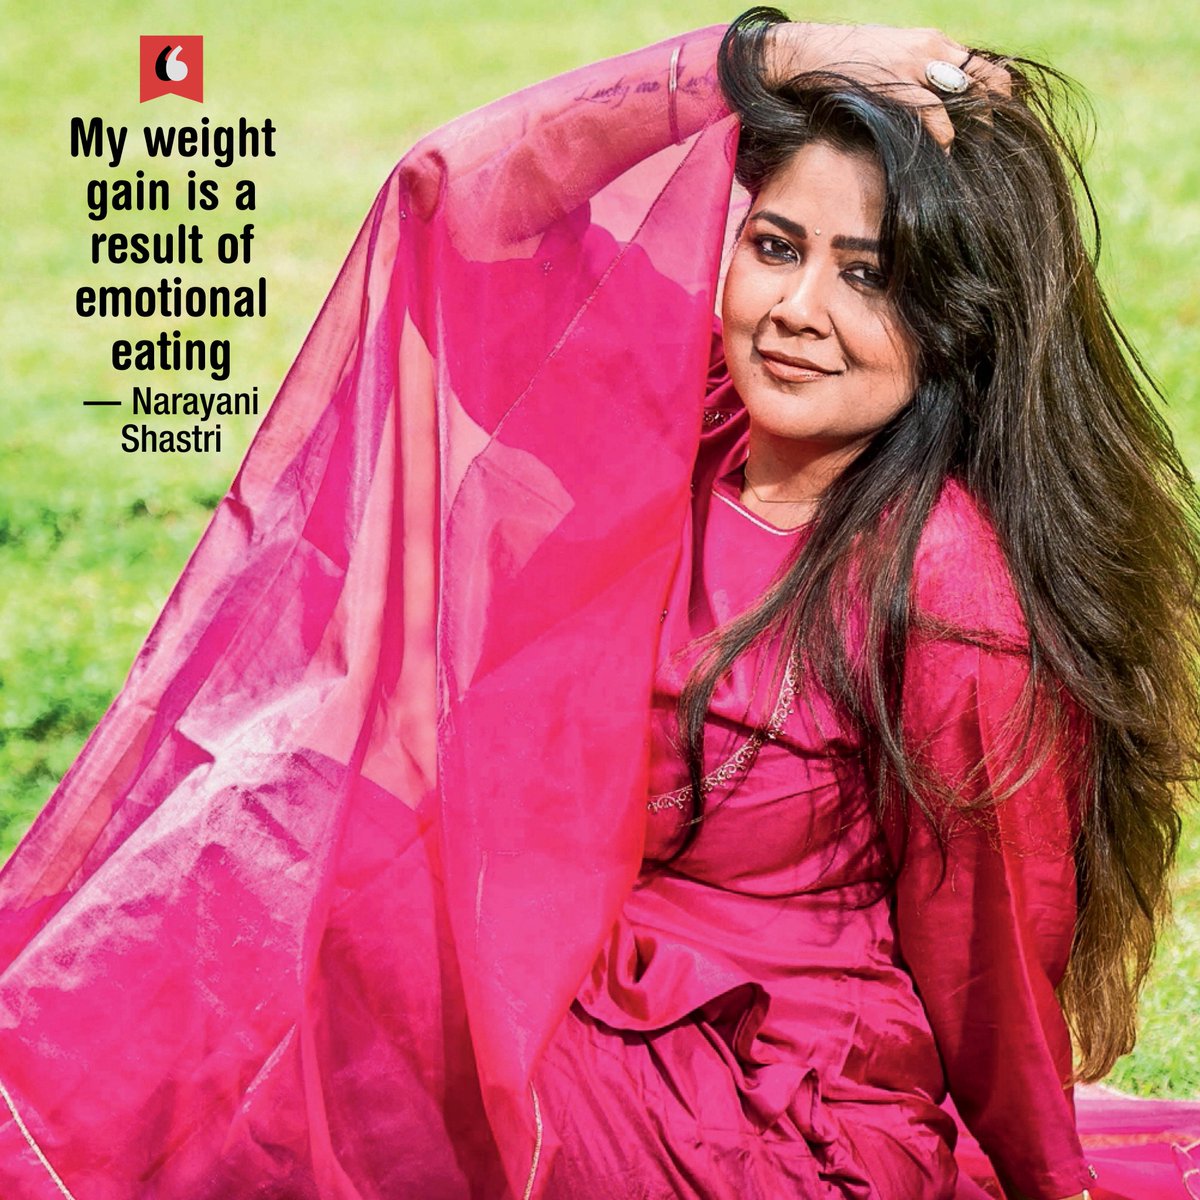 #NarayaniShashtri on how she stays fit, combating emotional eating and why she likes to do roles with substance Read: shorturl.at/ABP29 @narayanishastri